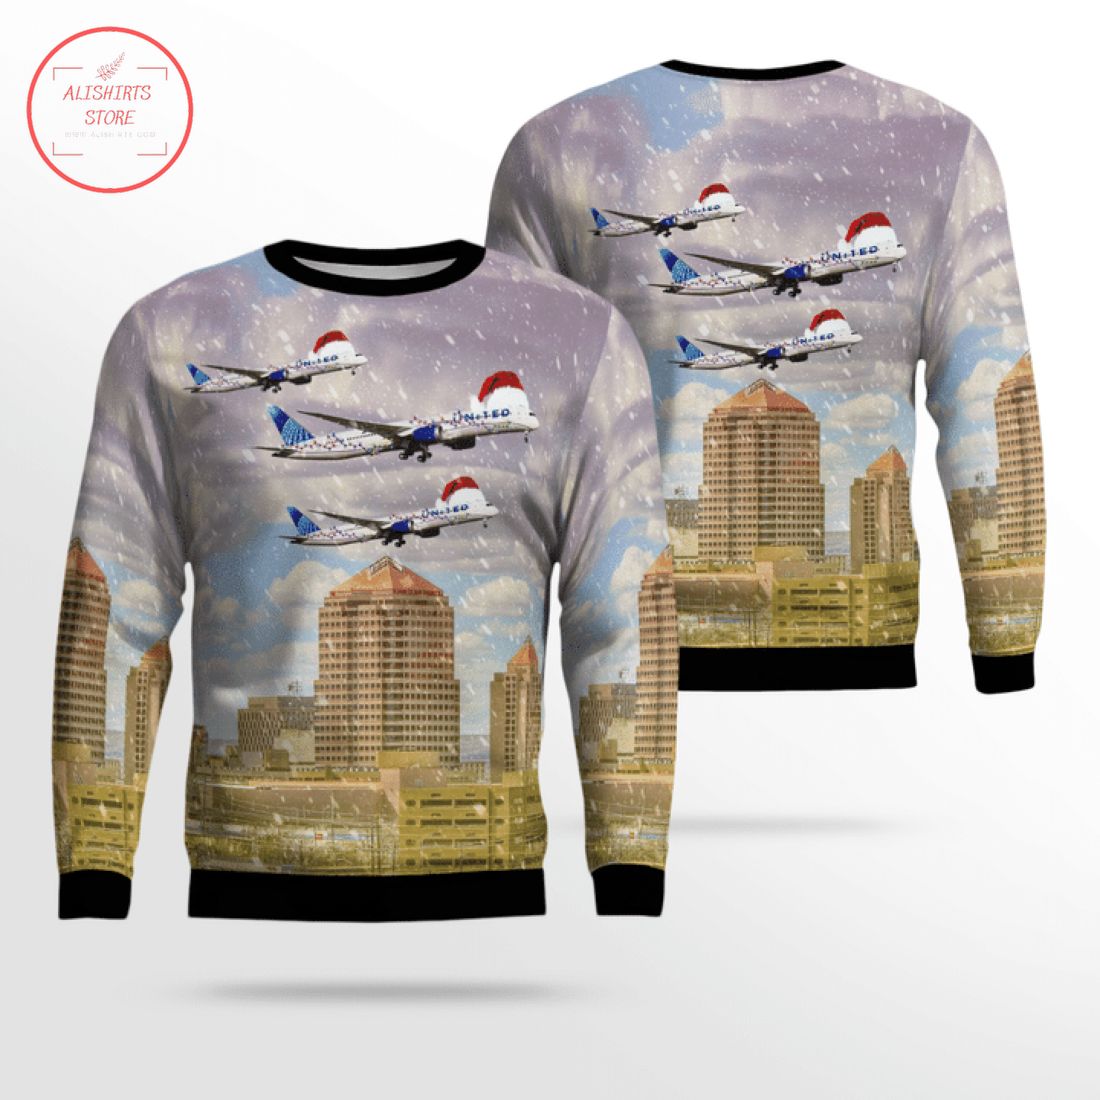 United Airlines Boeing 787 Dreamliner Over Albuquerque Ugly Christmas Sweater